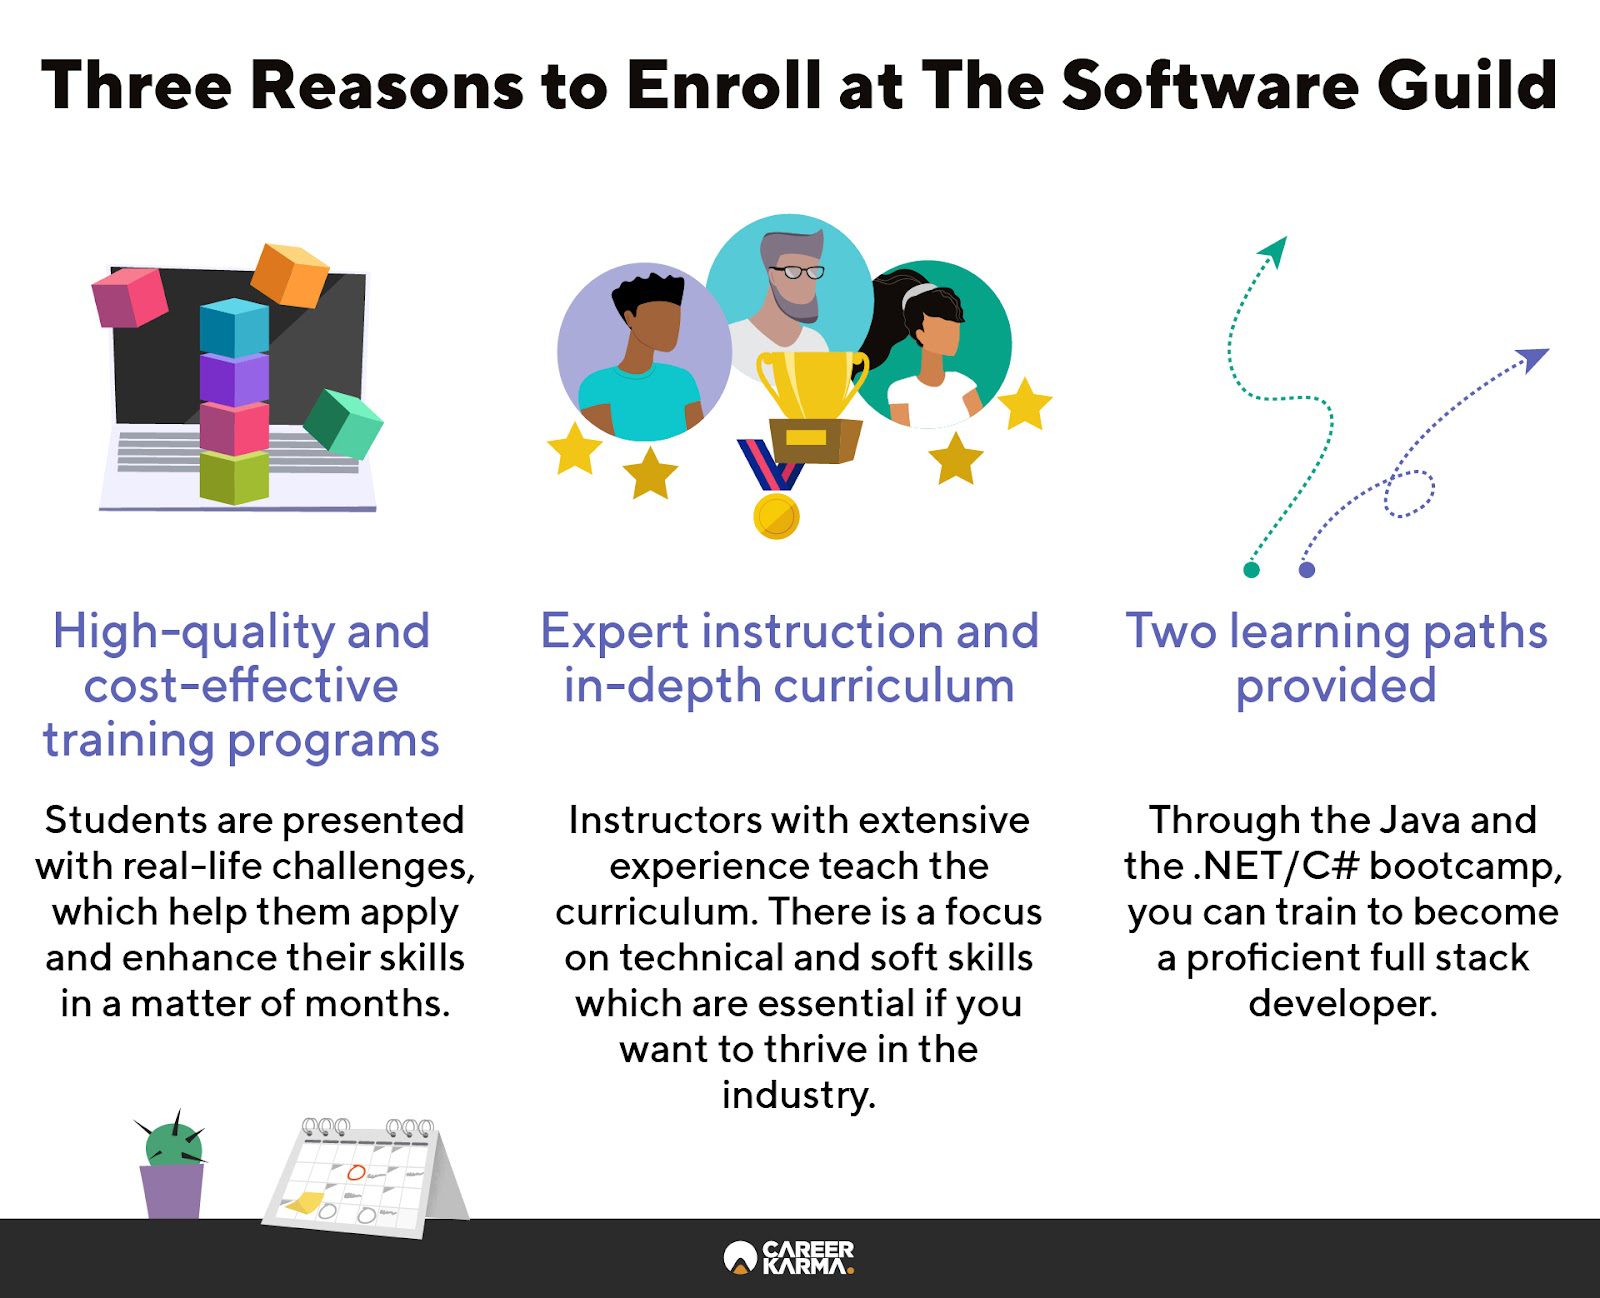 An infographic covering the benefits of attending The Software Guild